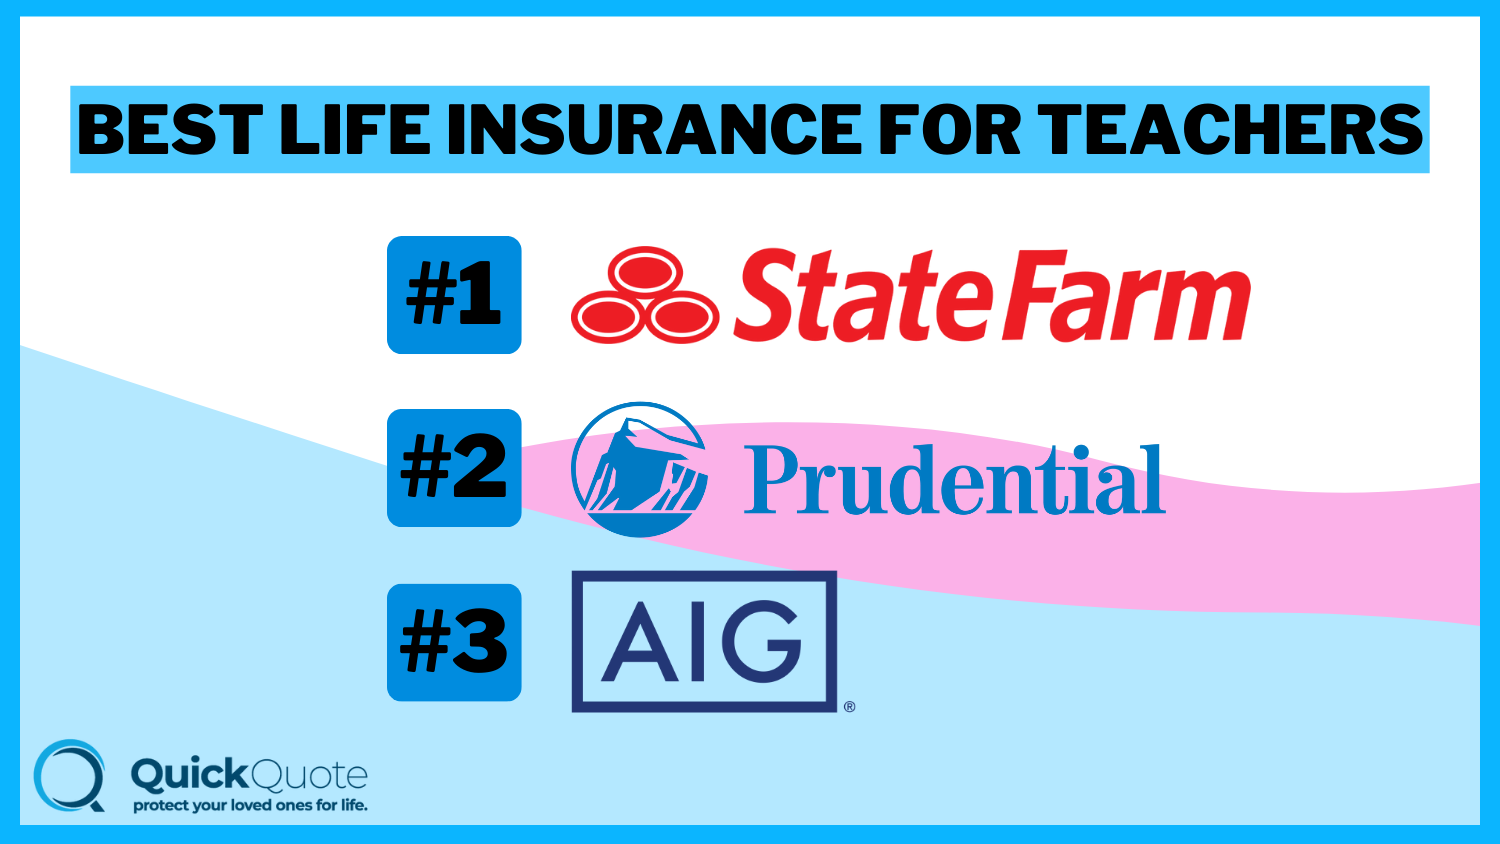 State Farm, Prudential, AIG: Best Life Insurance for Teachers